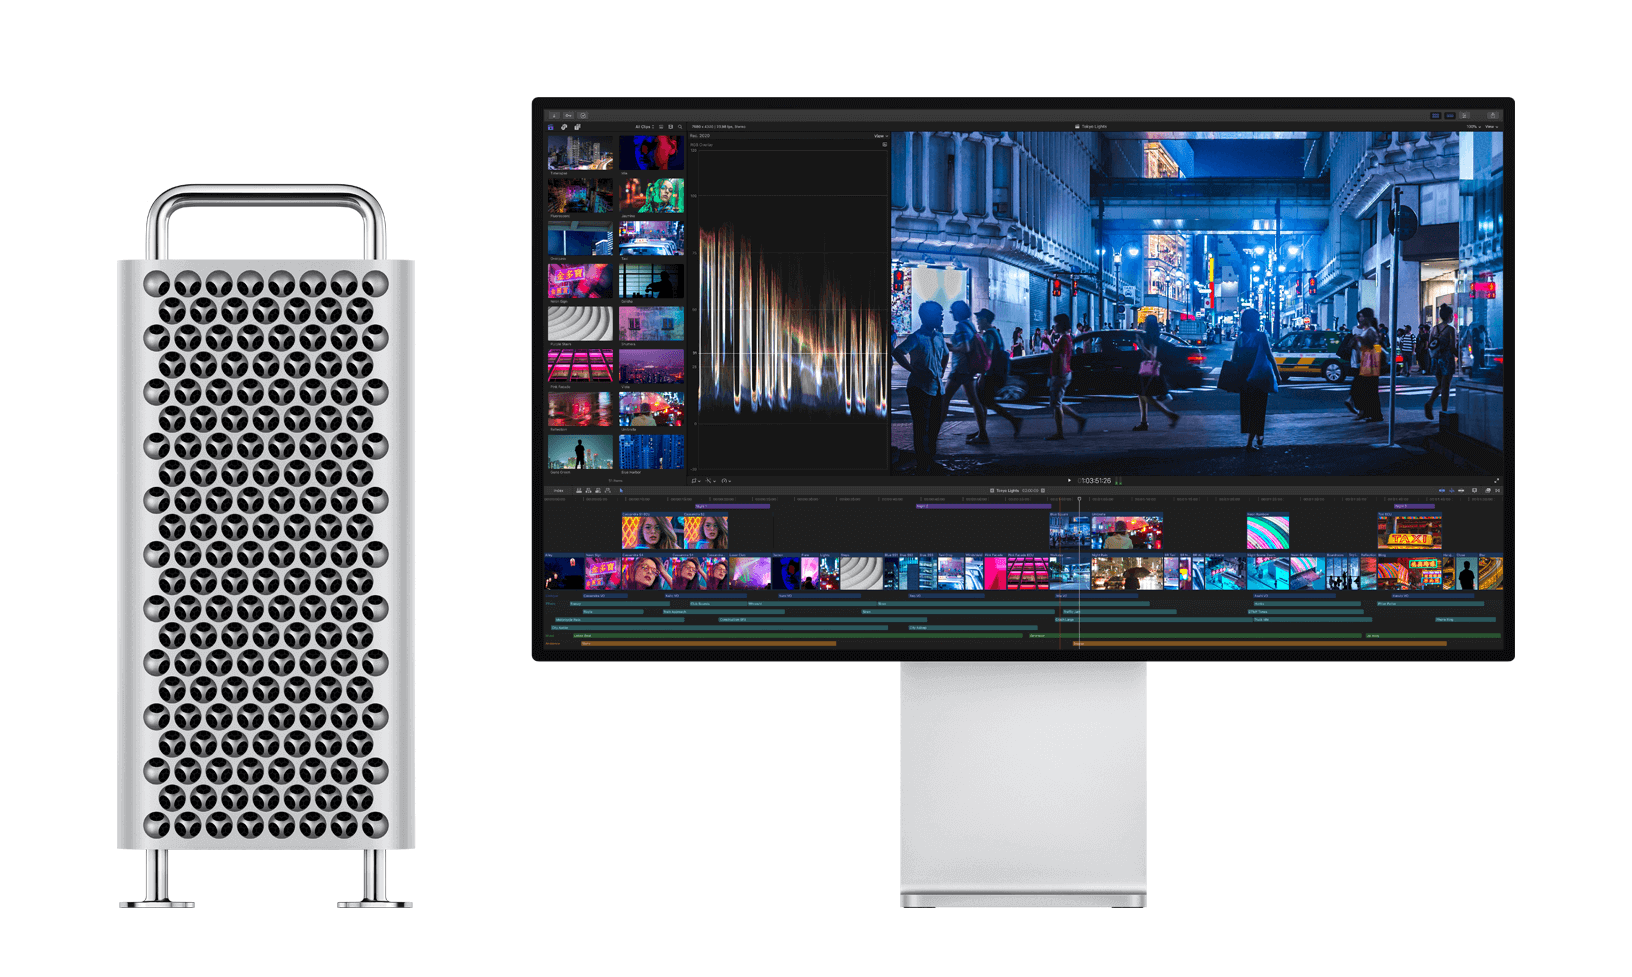 Apple unveils the 2019 Mac Pro, a $5,999 workstation powered by an 8-core Intel Xeon processor